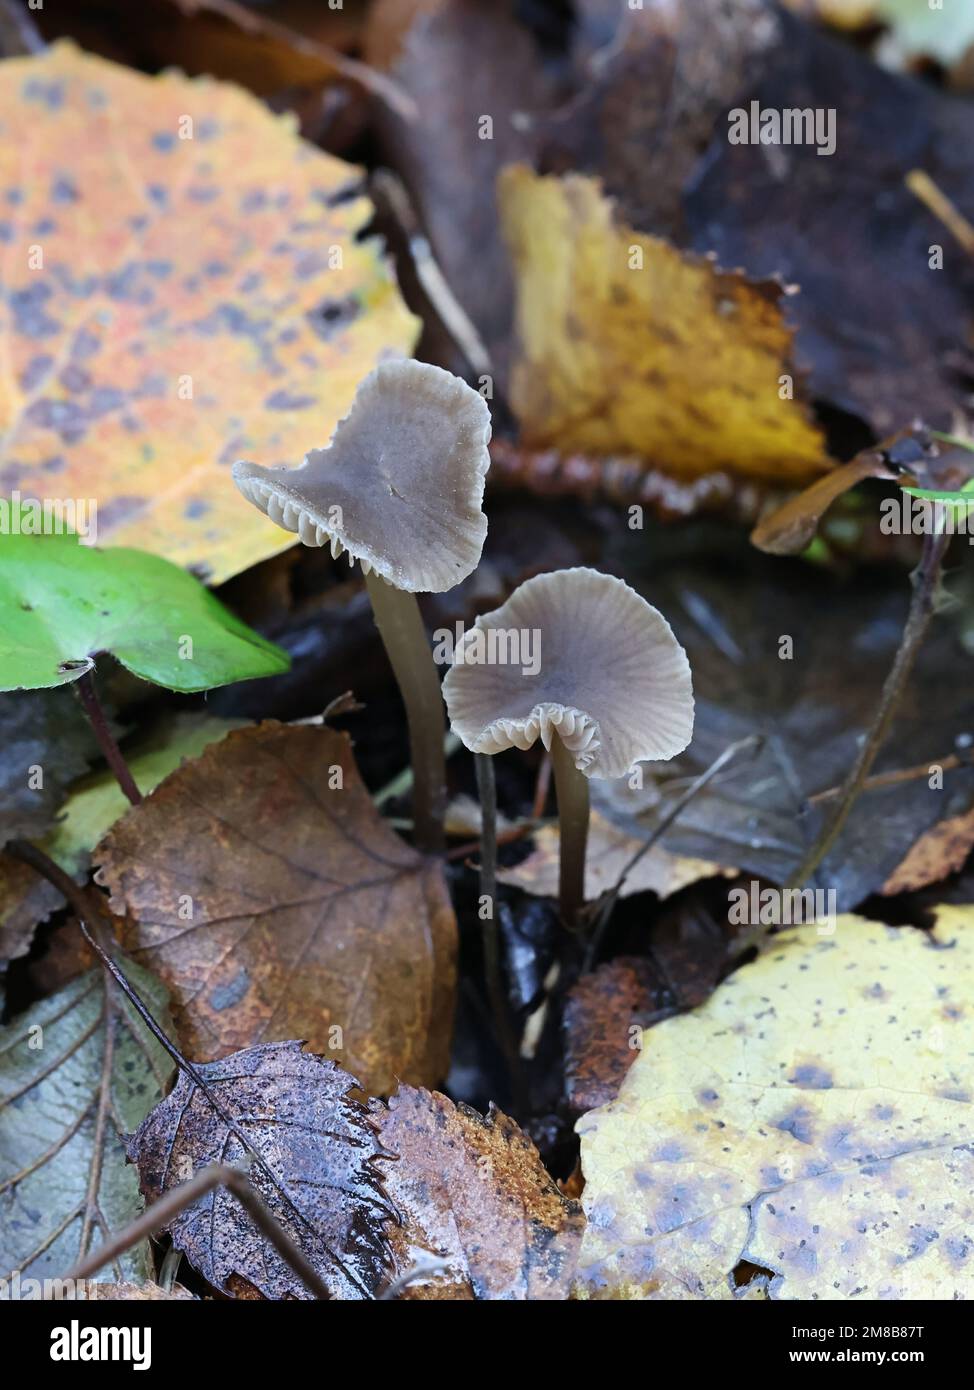 Entoloma juncinum, a pinkgill mushroom from Finland, no common English name Stock Photo